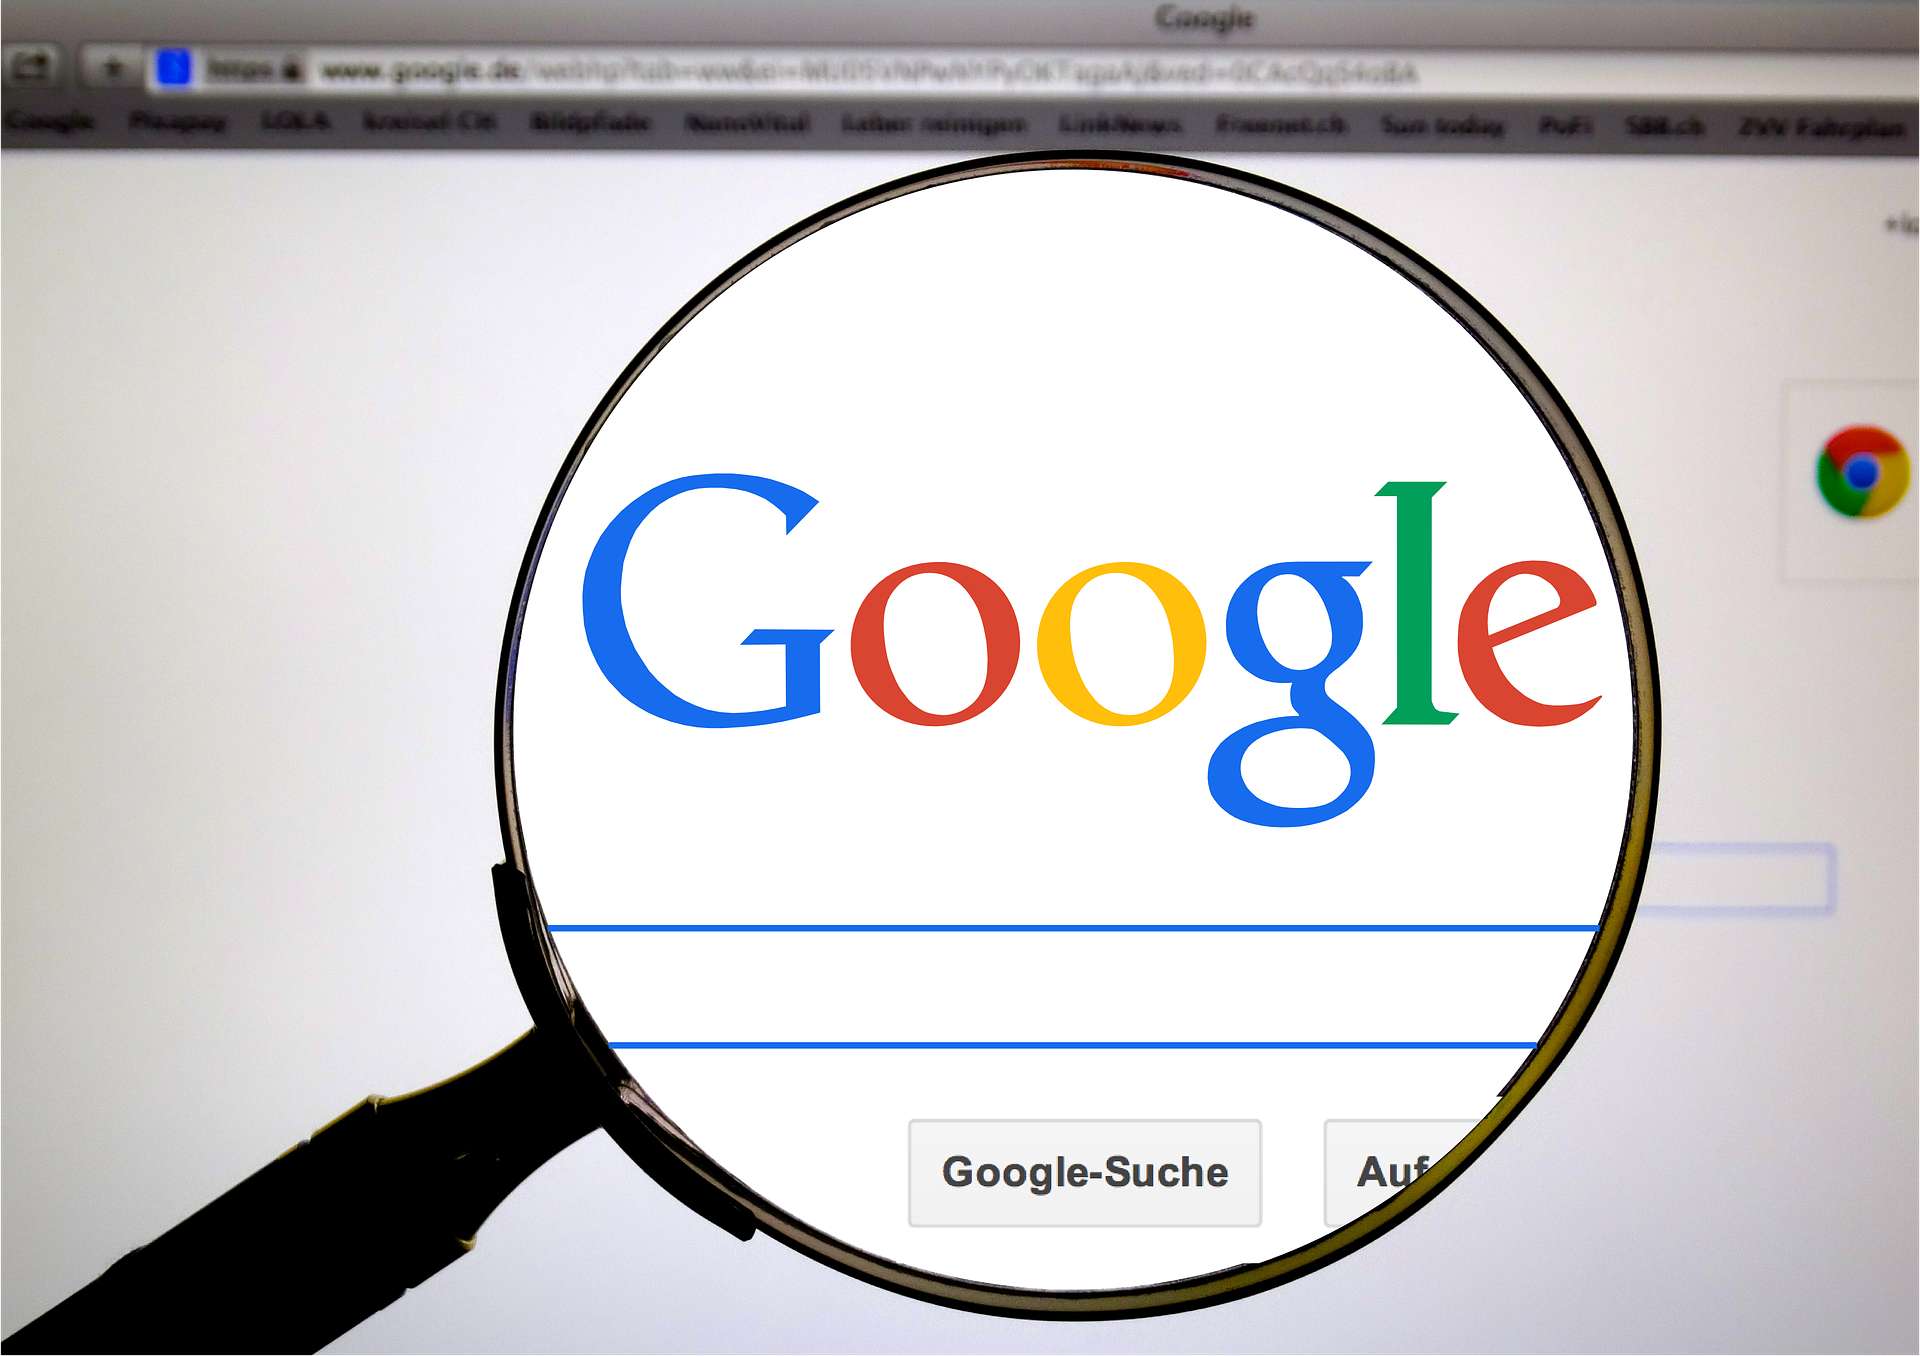 Finally a tool to delete personal information from Google

